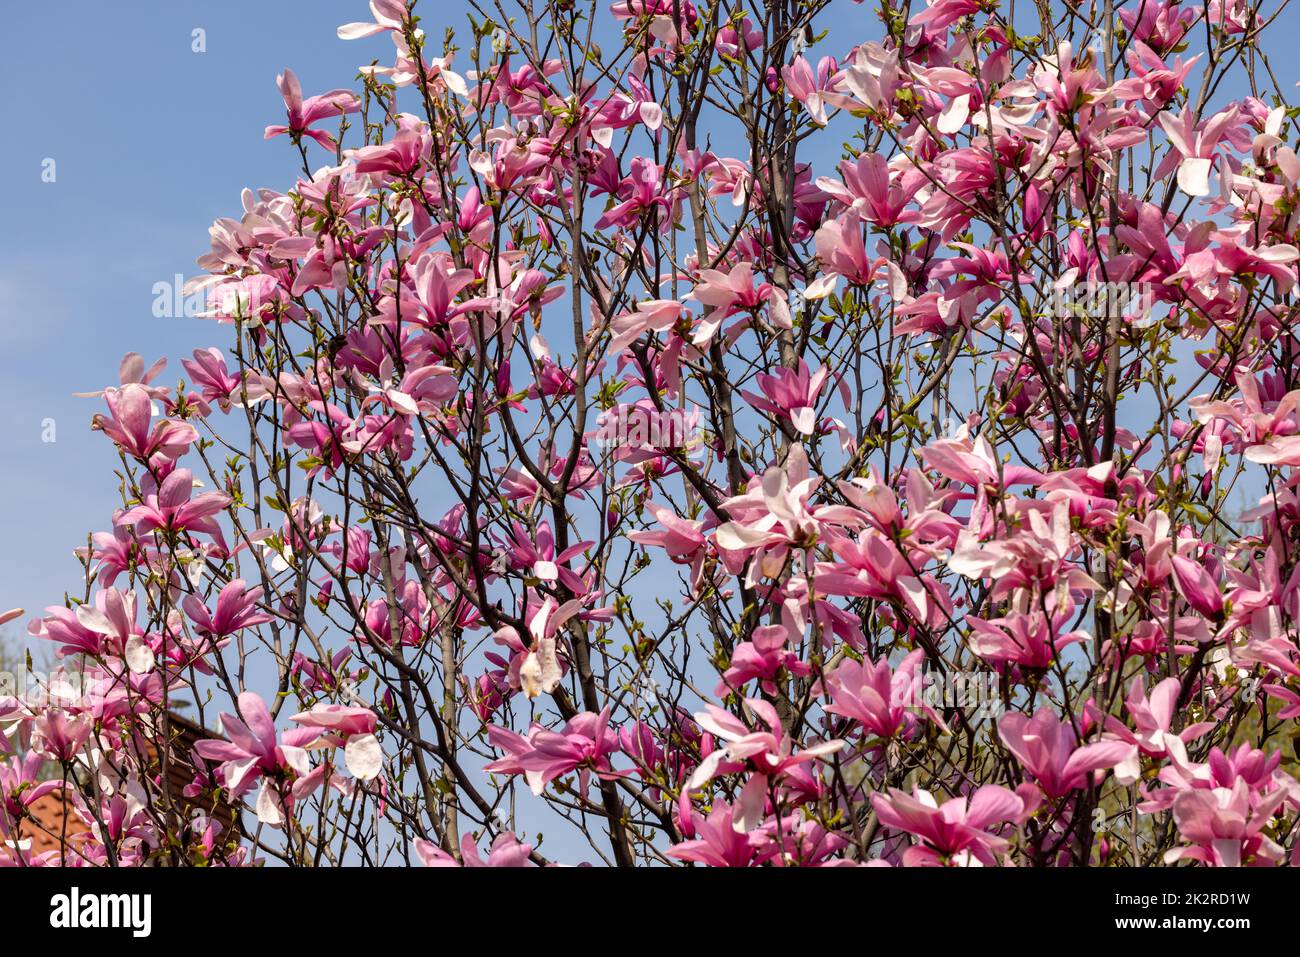 Pink magnolia flowers on a tree branch. Stock Photo